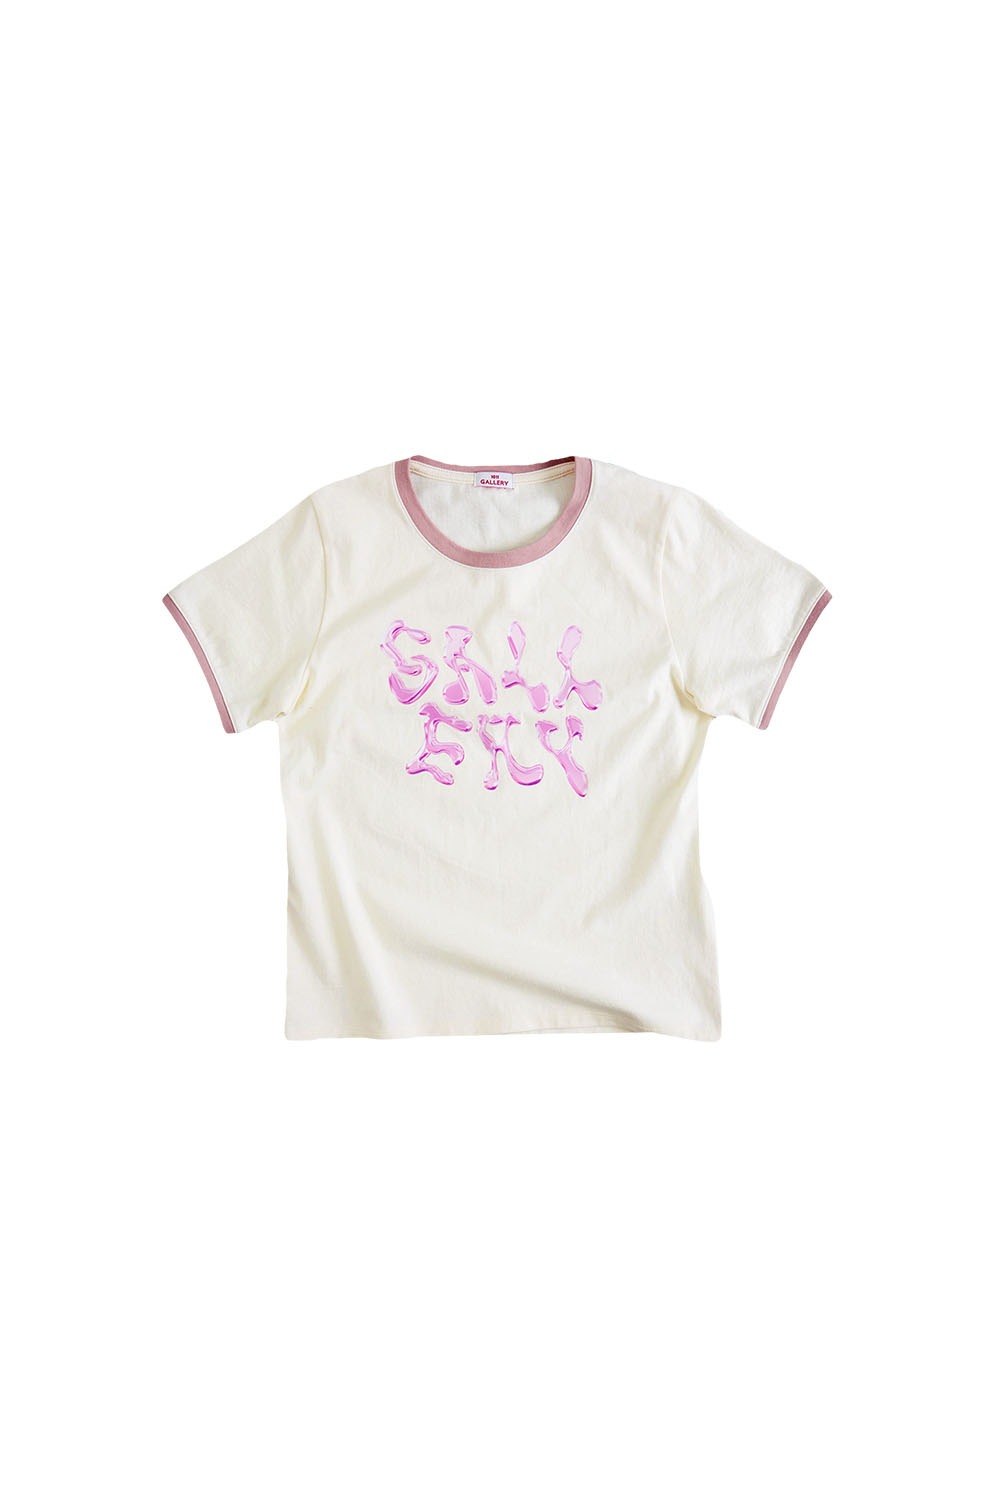 Gallery Baby Ringer T-shirt - Ivory / Pink